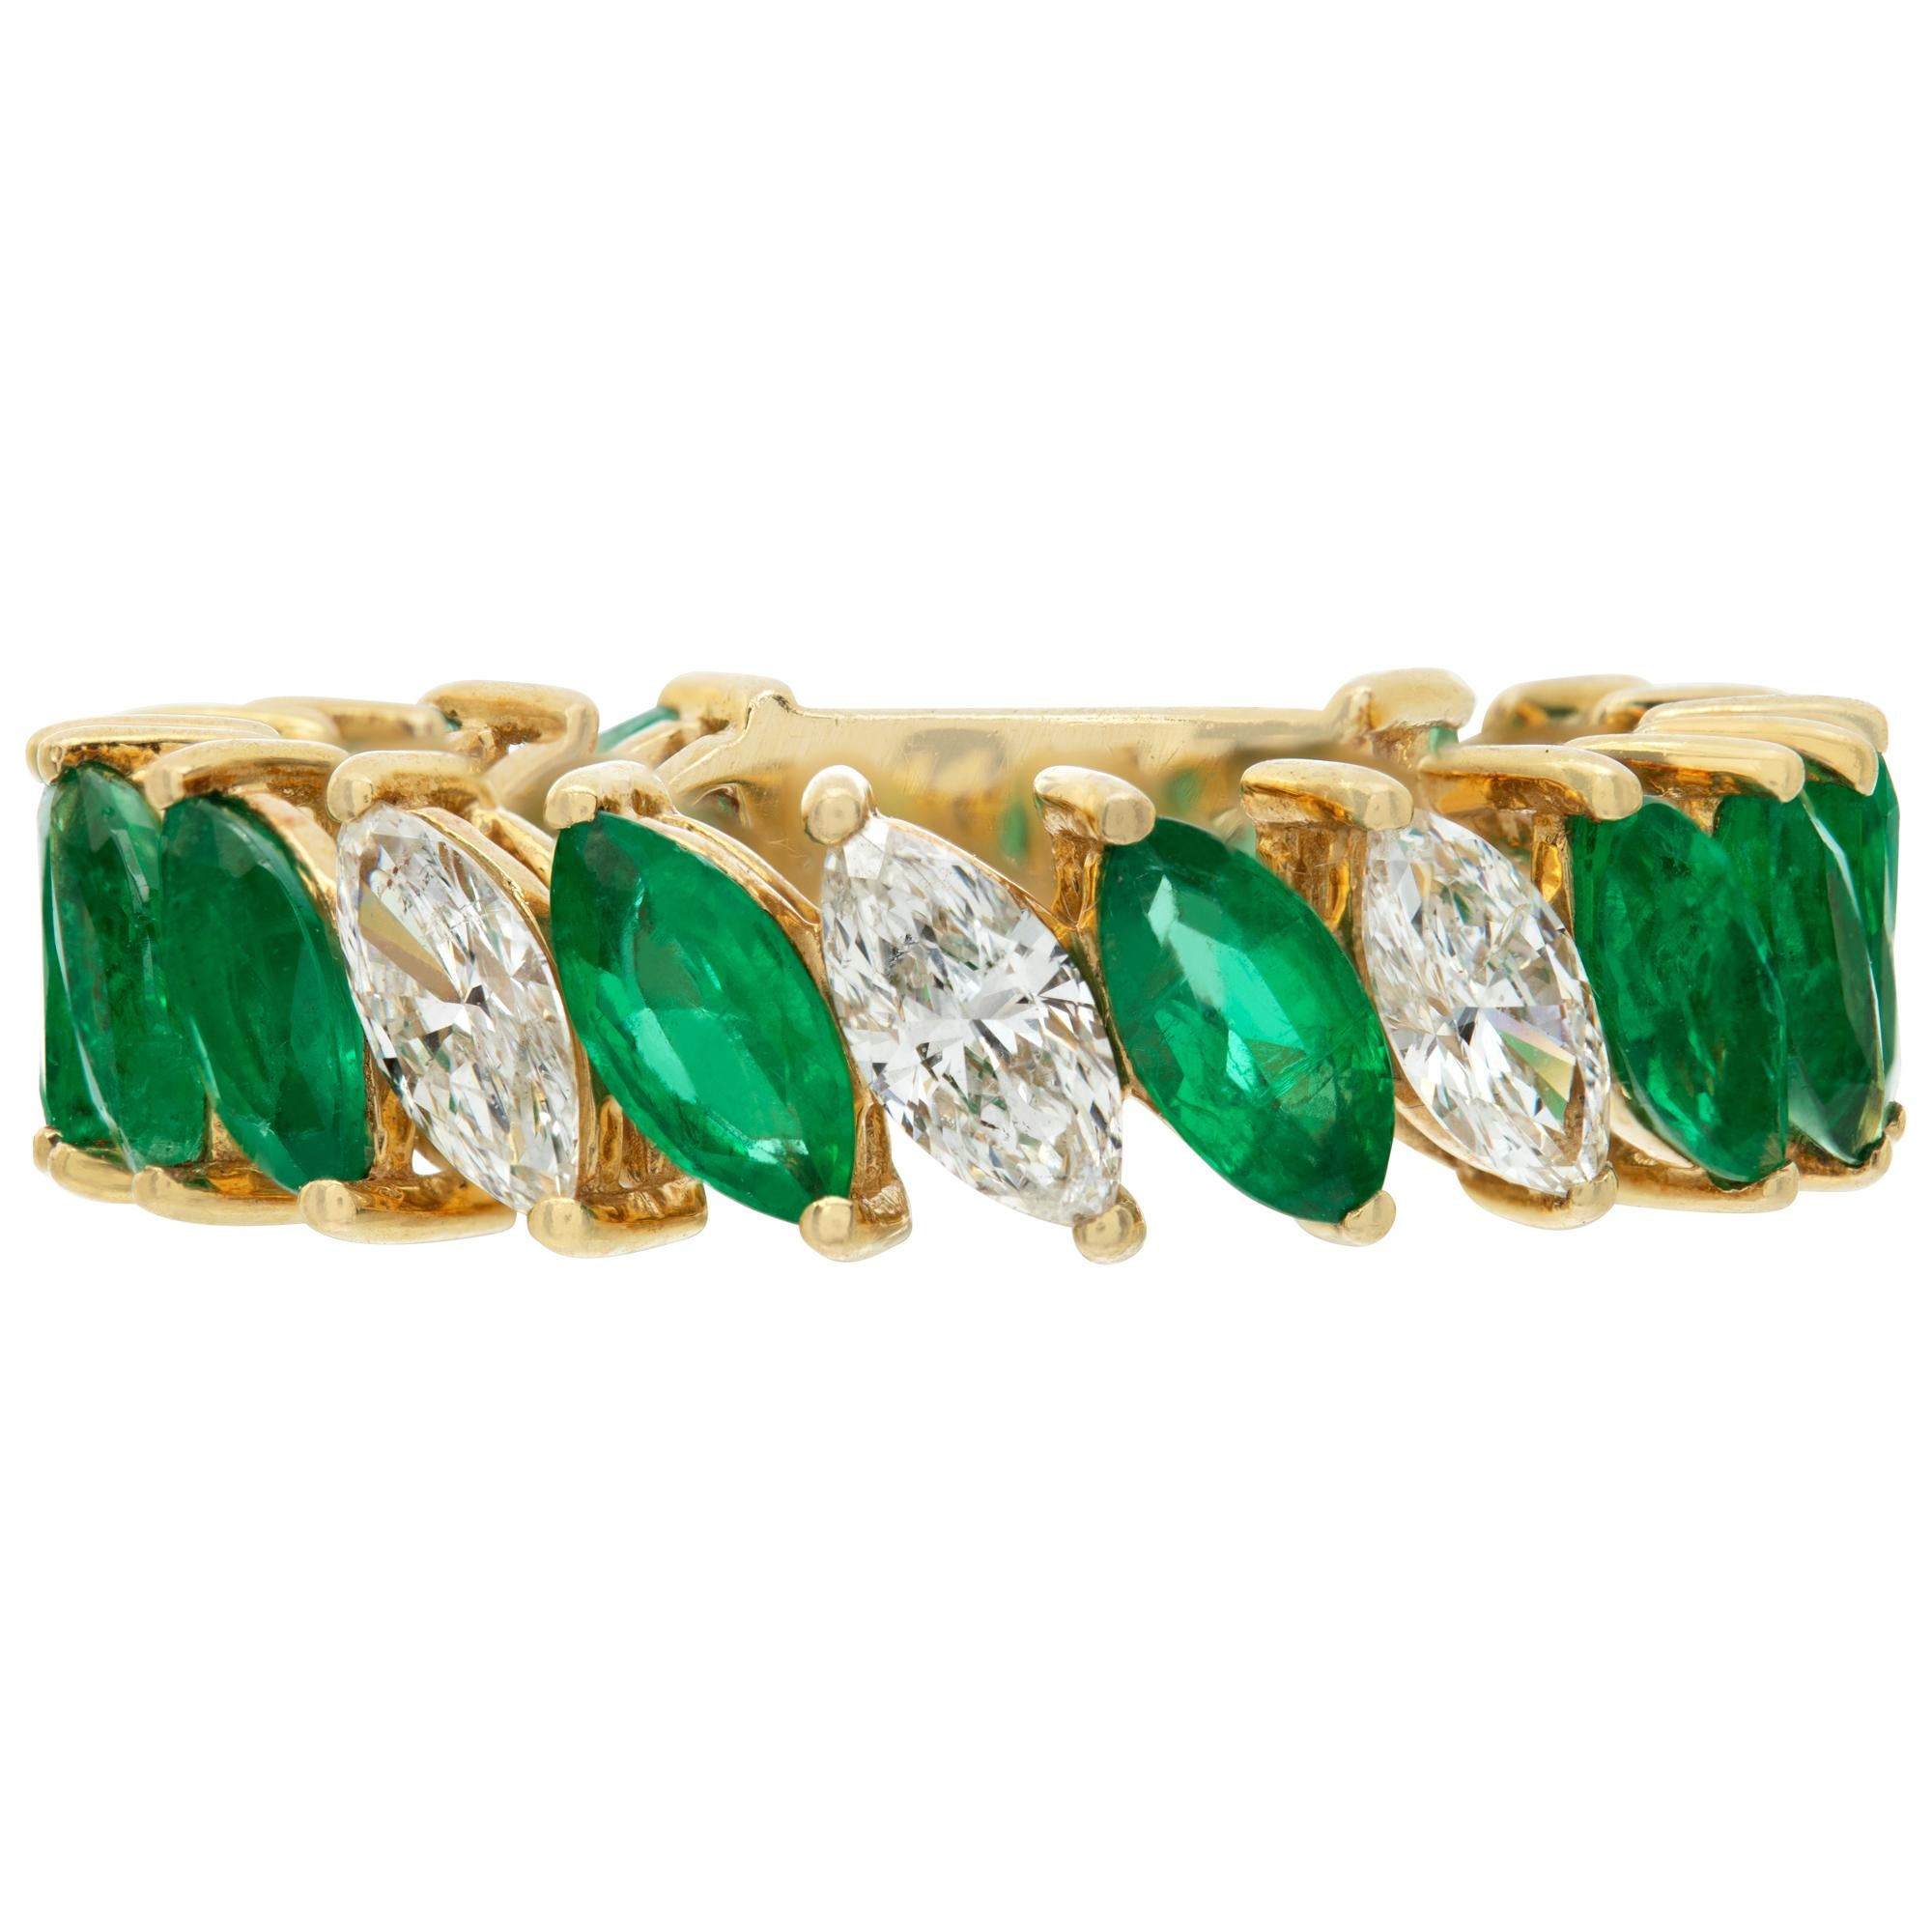 Marquise cut Emerald & Diamond Eternity ring in 18K yellow gold. Total emerald/diamonds weight: 3.90 carats (Stamped inside the ring with hallmarks 55292). Width: 5mm. Size 7This Diamond/Emerald ring is currently size 7 and some items can be sized